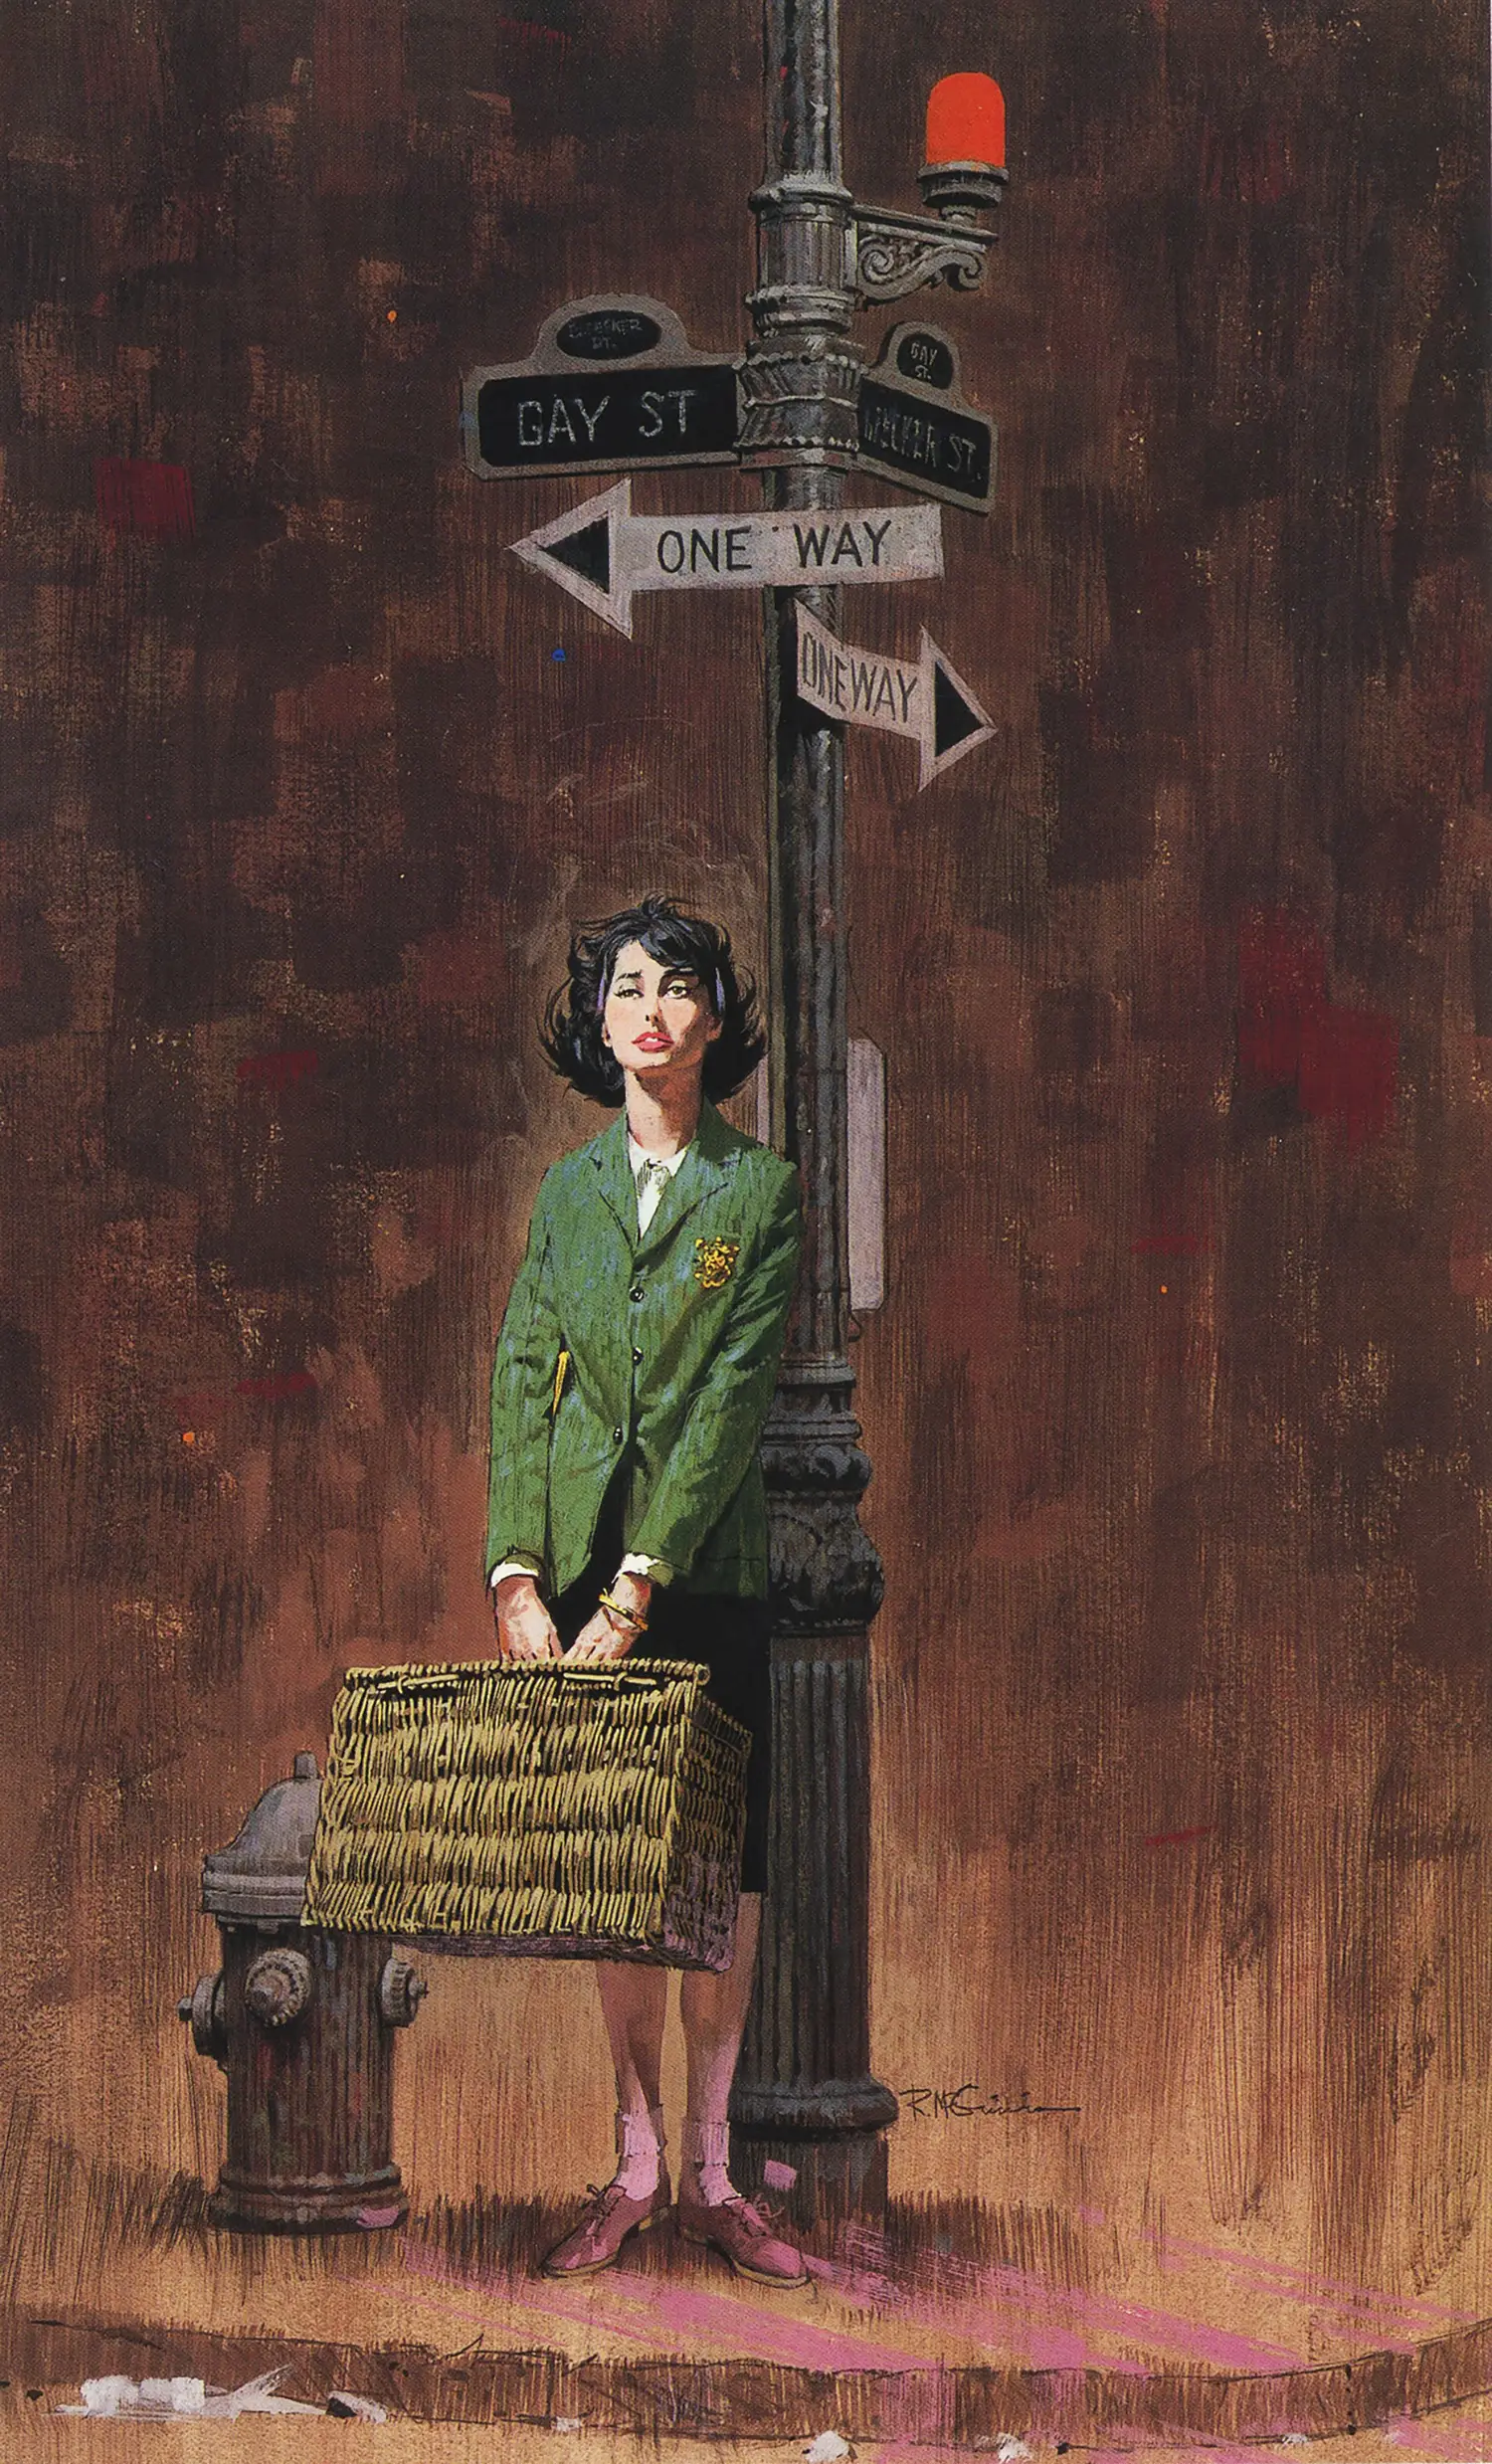 A woman standing alone in an urban environment at night, clutching a woven basket. She is wearing bright red lipstick and a green coat. 